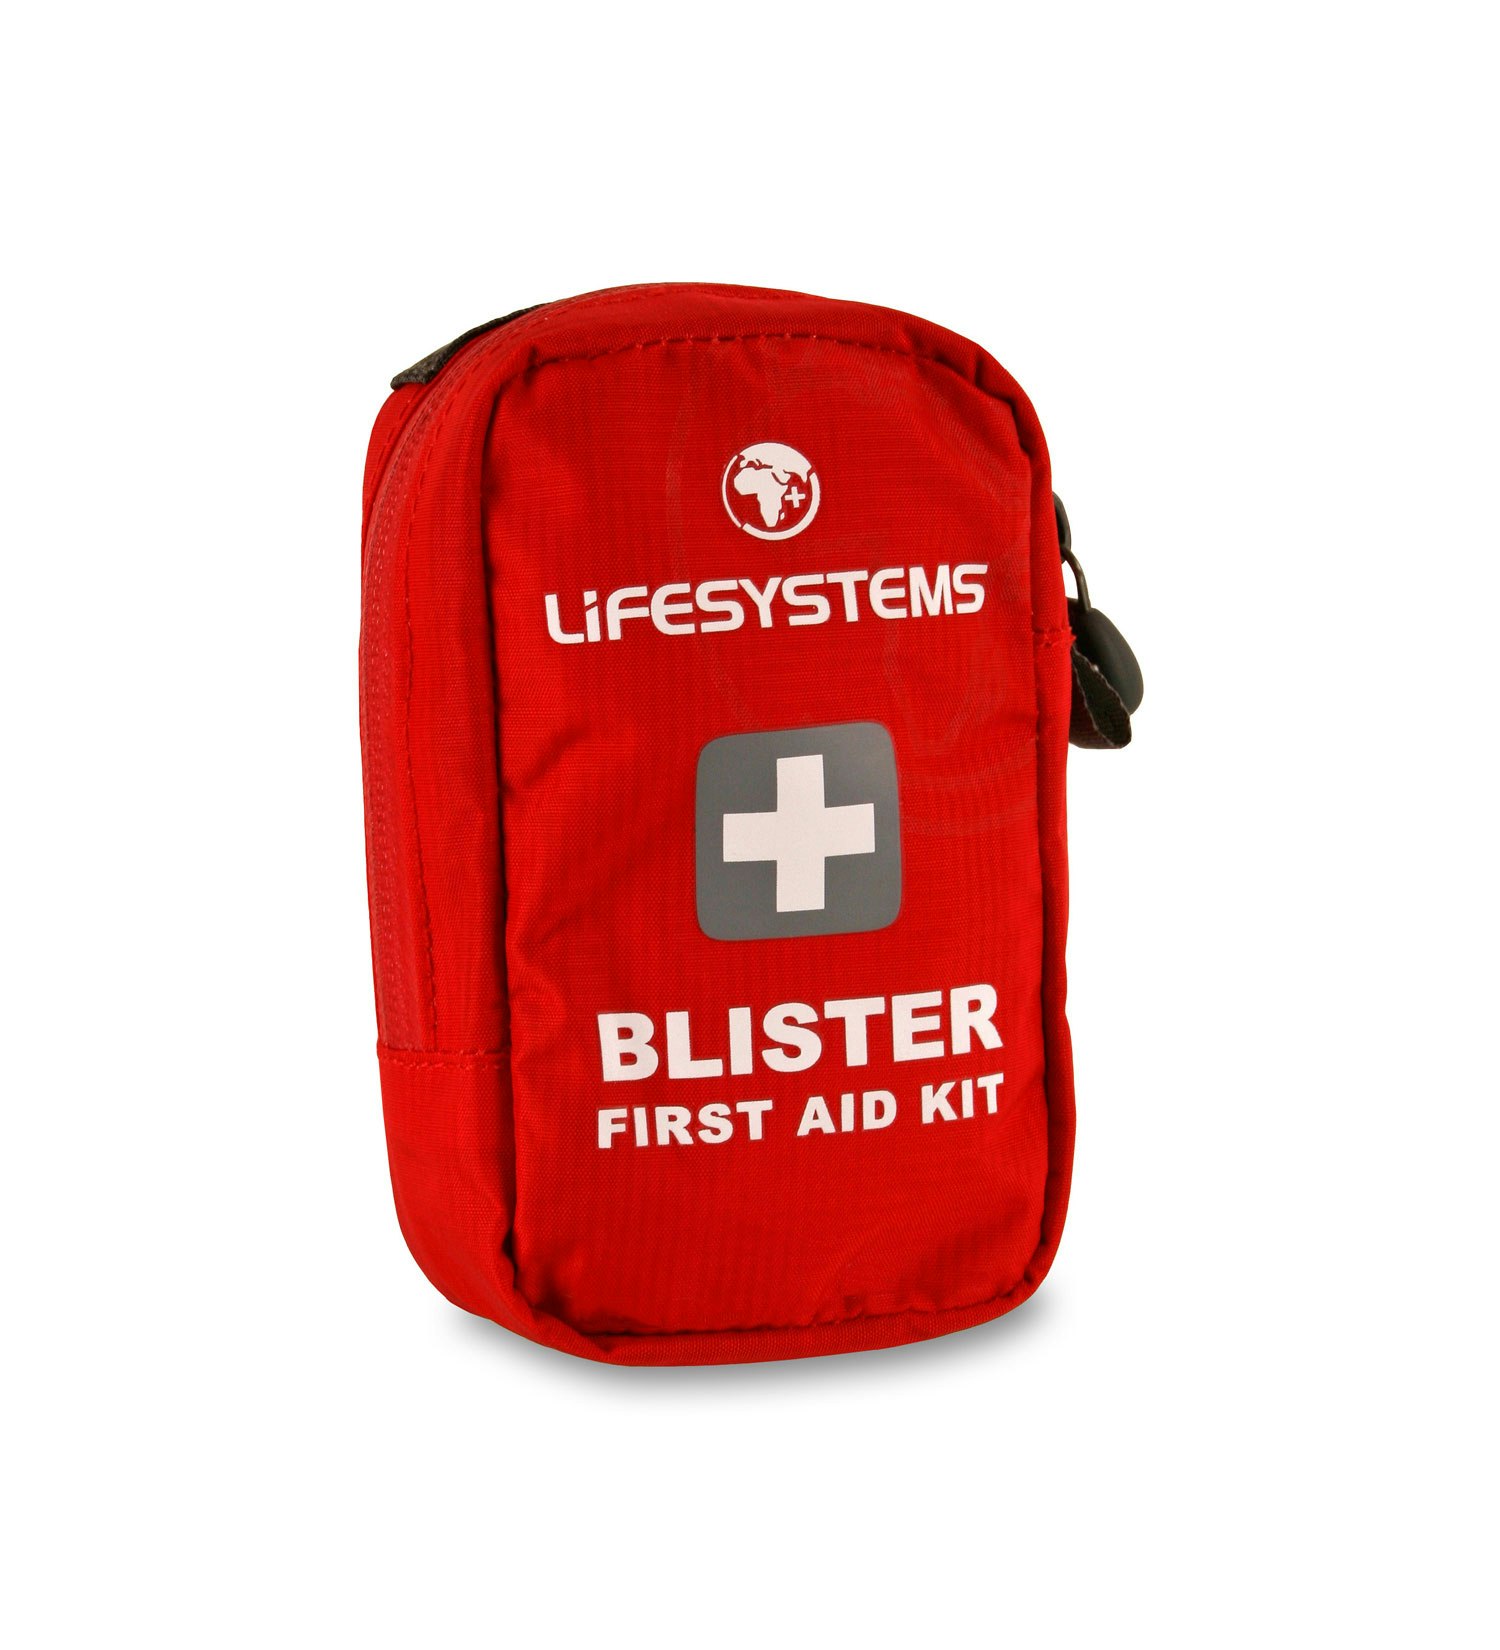 Lifesystems(r) Blister First Aid Kit